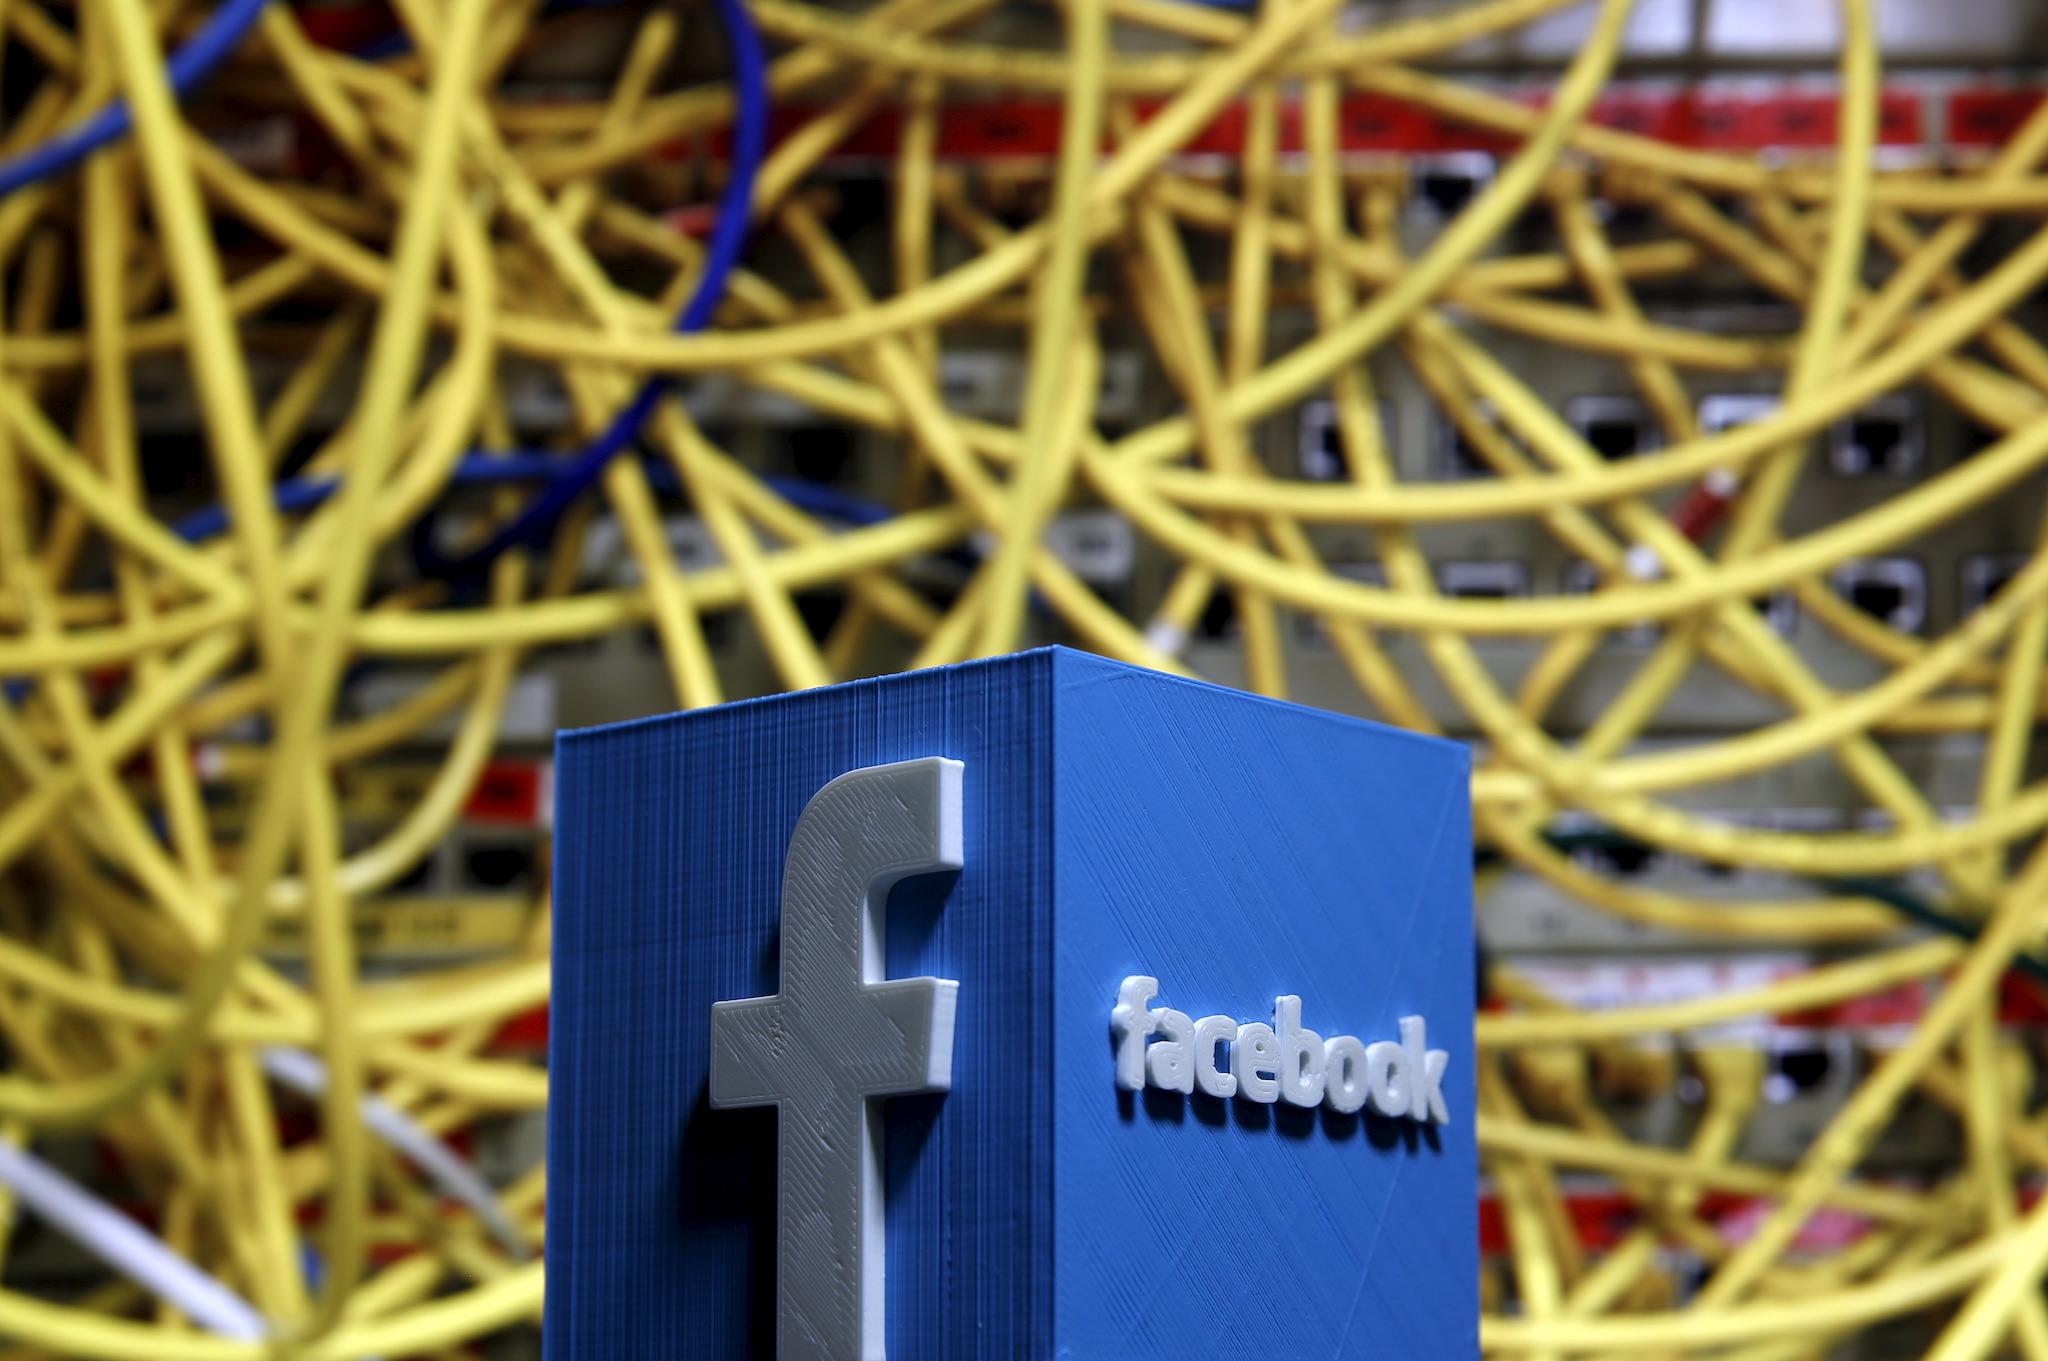 A 3D plastic representation of the Facebook logo is seen in front of displayed cables in this illustration in Zenica, Bosnia and Herzegovina May 13, 2015